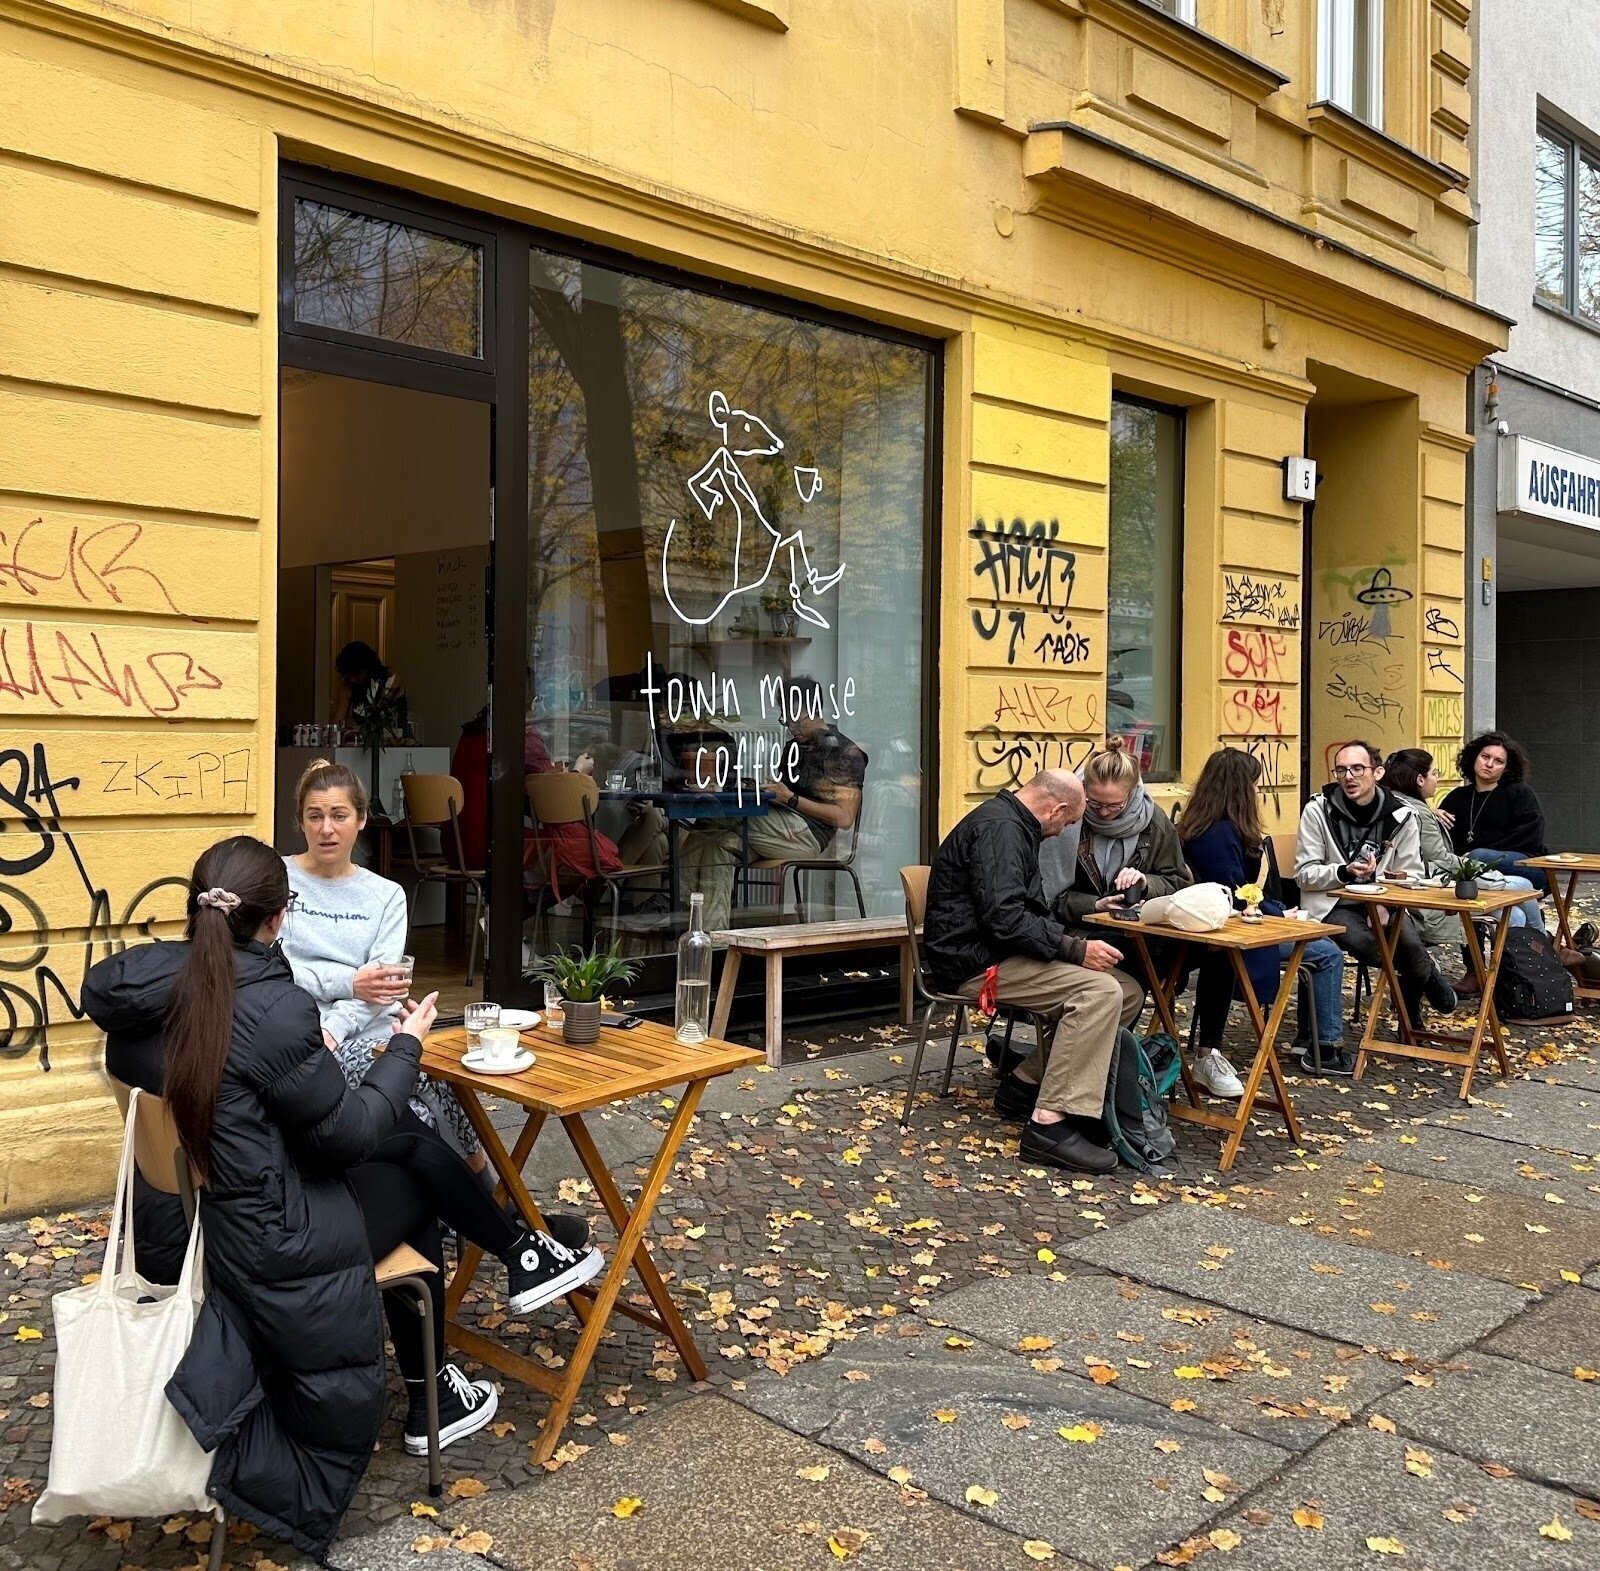 <span class="translation_missing" title="translation missing: en.meta.location_title, location_name: Town Mouse Coffee, city: Berlin">Location Title</span>